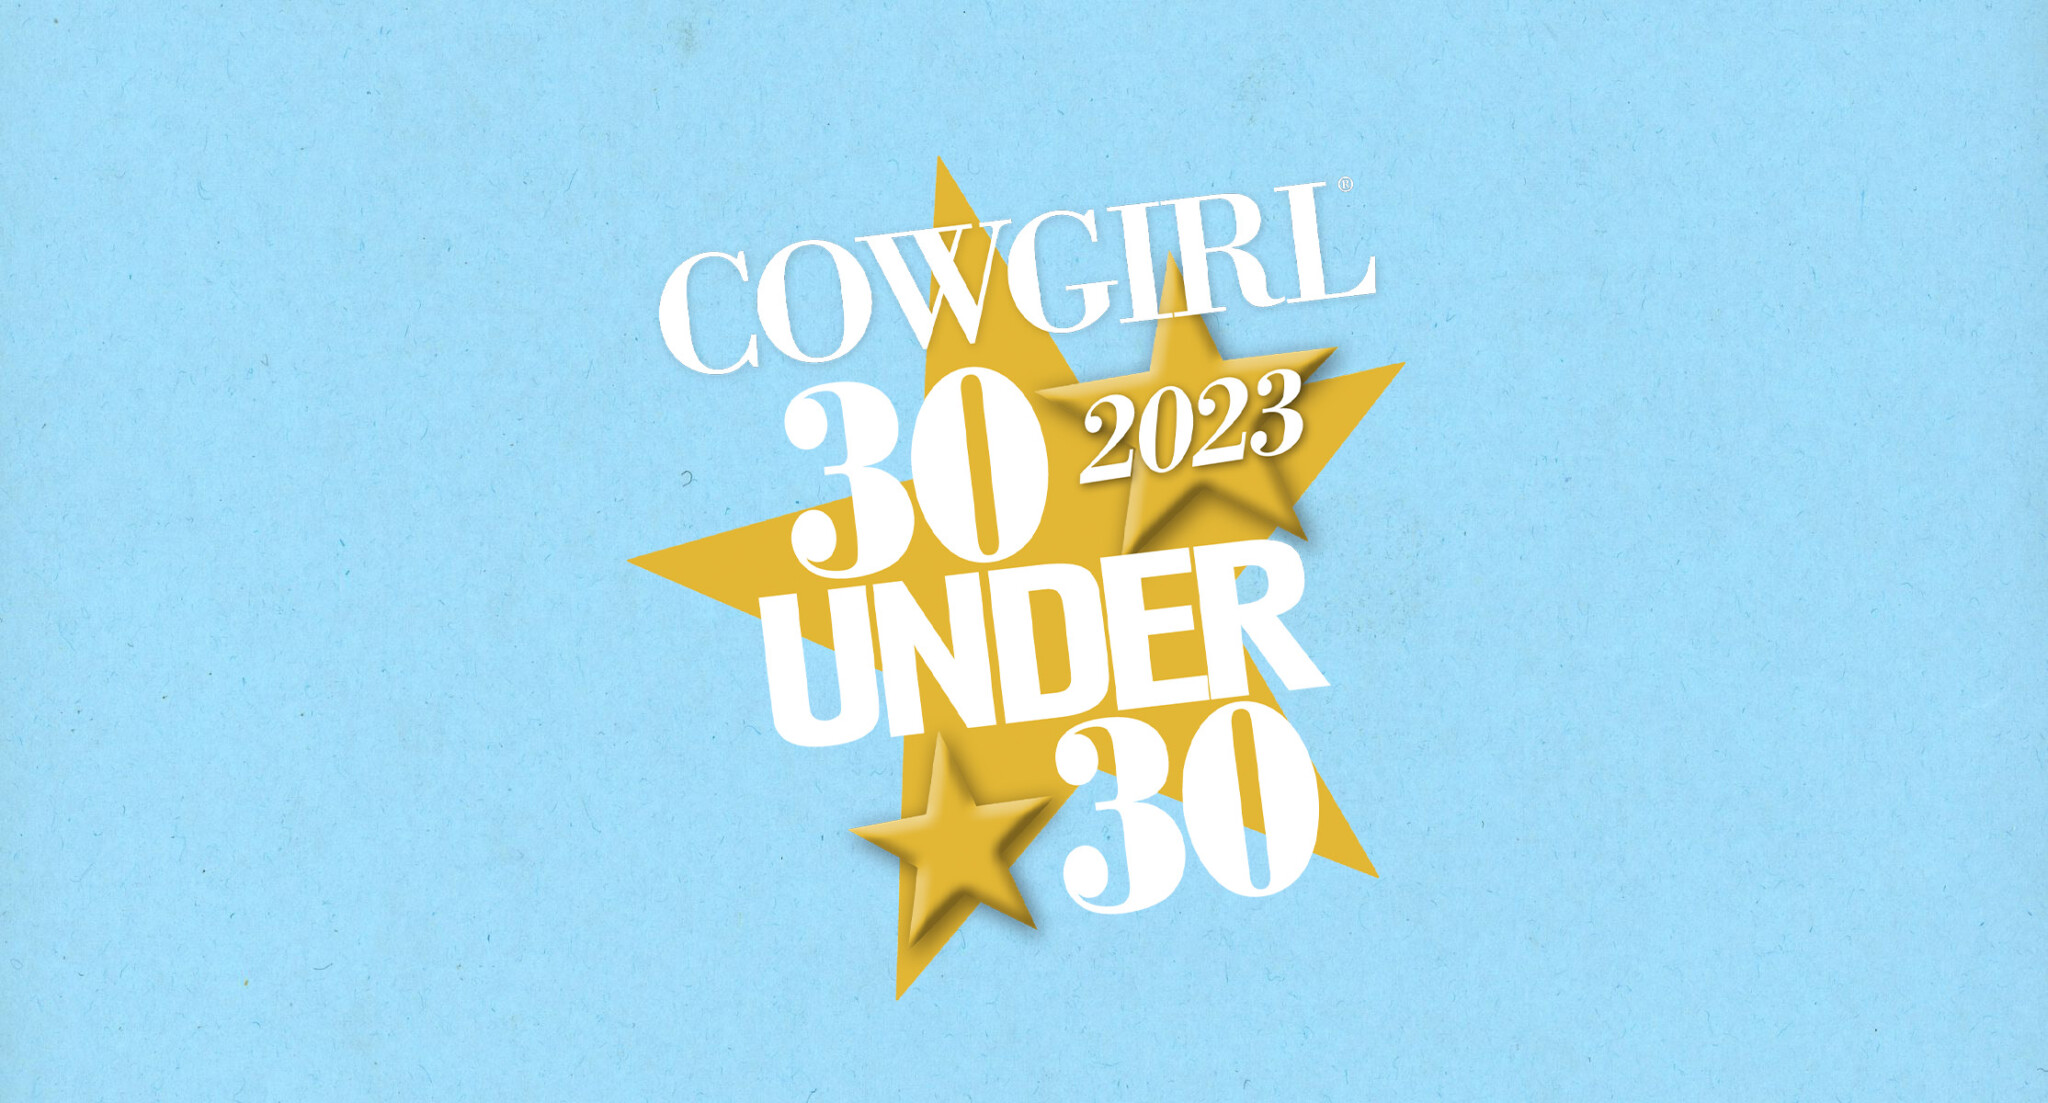 Cowgirl 30 Under 30 Offers Special Recognition Cowgirl 30 Under 30